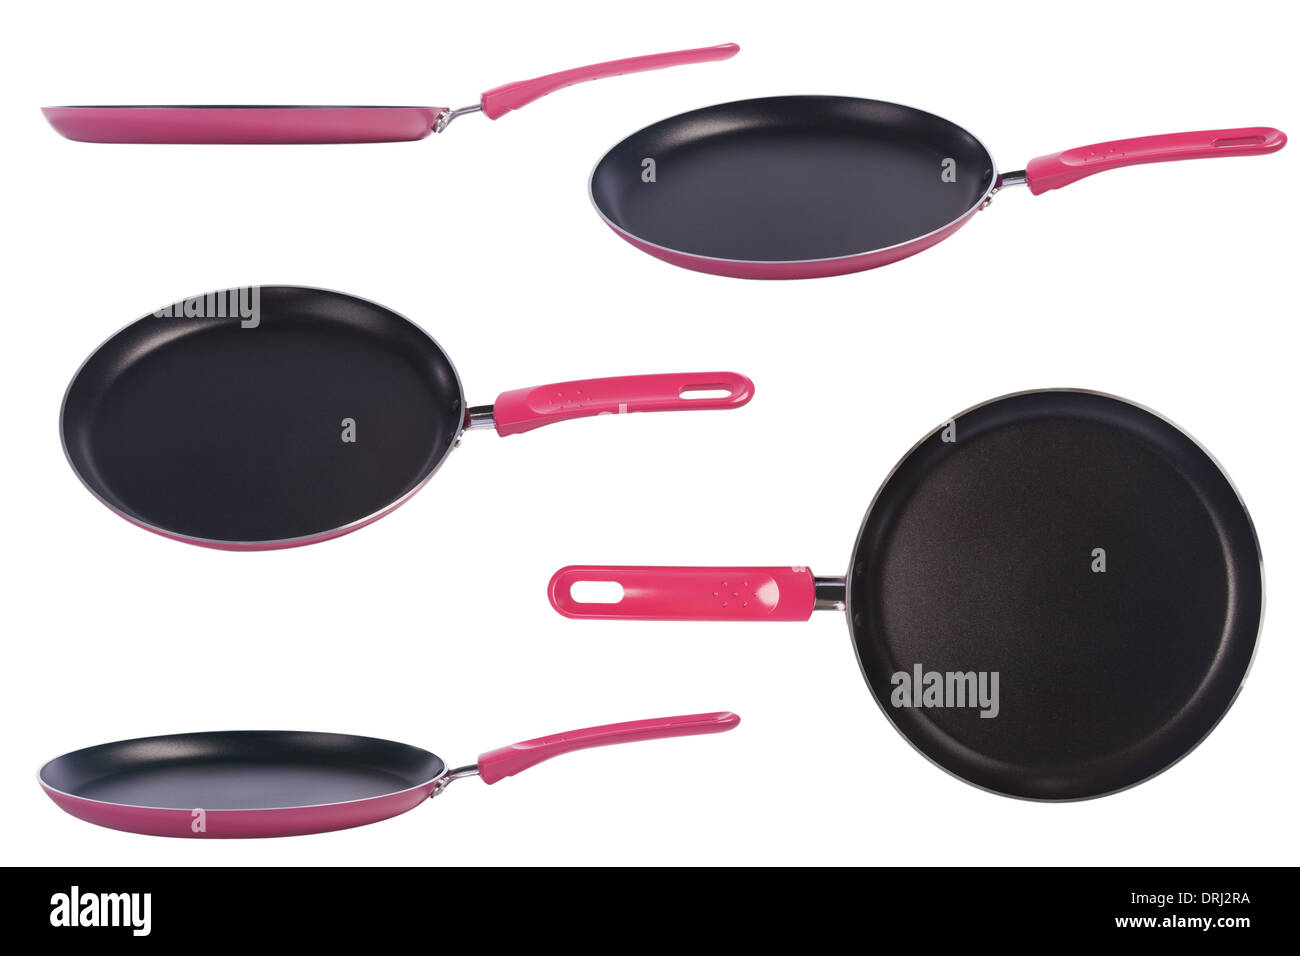 https://c8.alamy.com/comp/DRJ2RA/five-point-of-view-from-pink-frying-pan-with-a-nonstick-coating-DRJ2RA.jpg